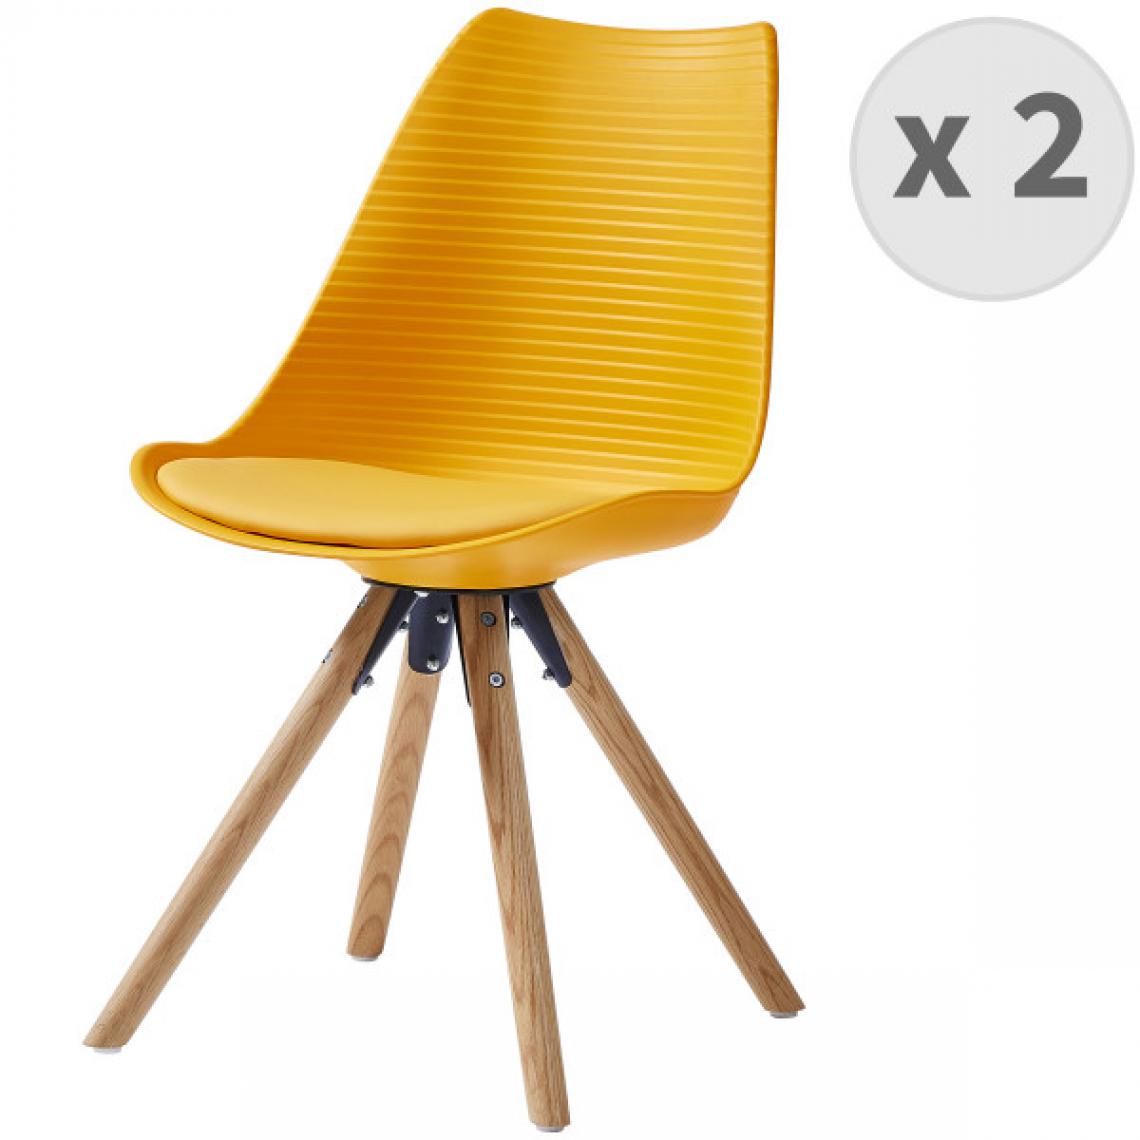 Moloo - CROSS-Chaise scandinave curry pieds chêne (x2) - Chaises